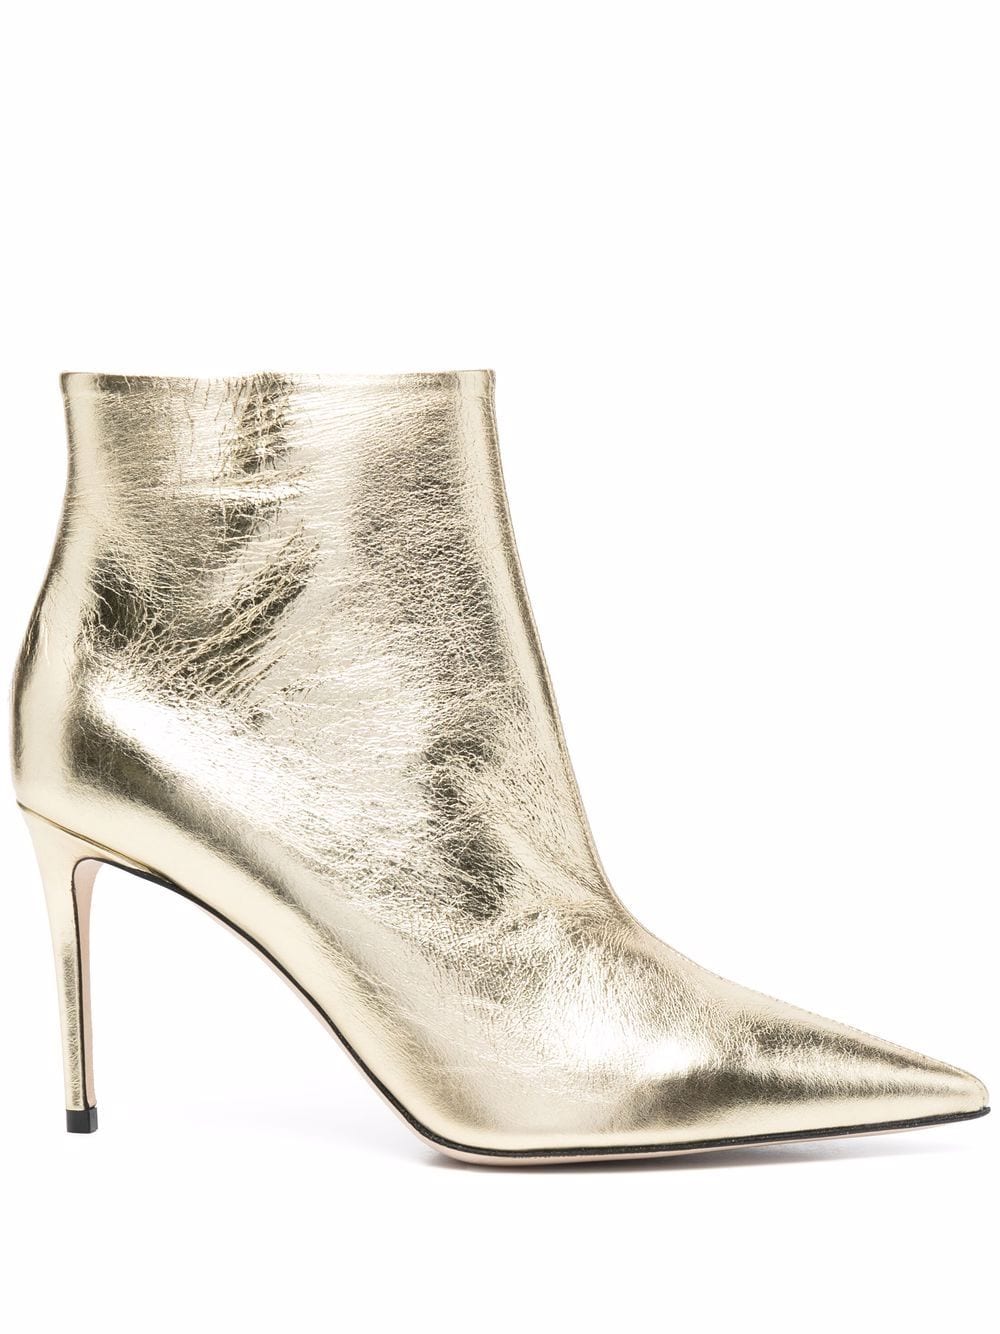 Scarosso x Brian Atwood Anya metallic-effect ankle boots - Gold von Scarosso